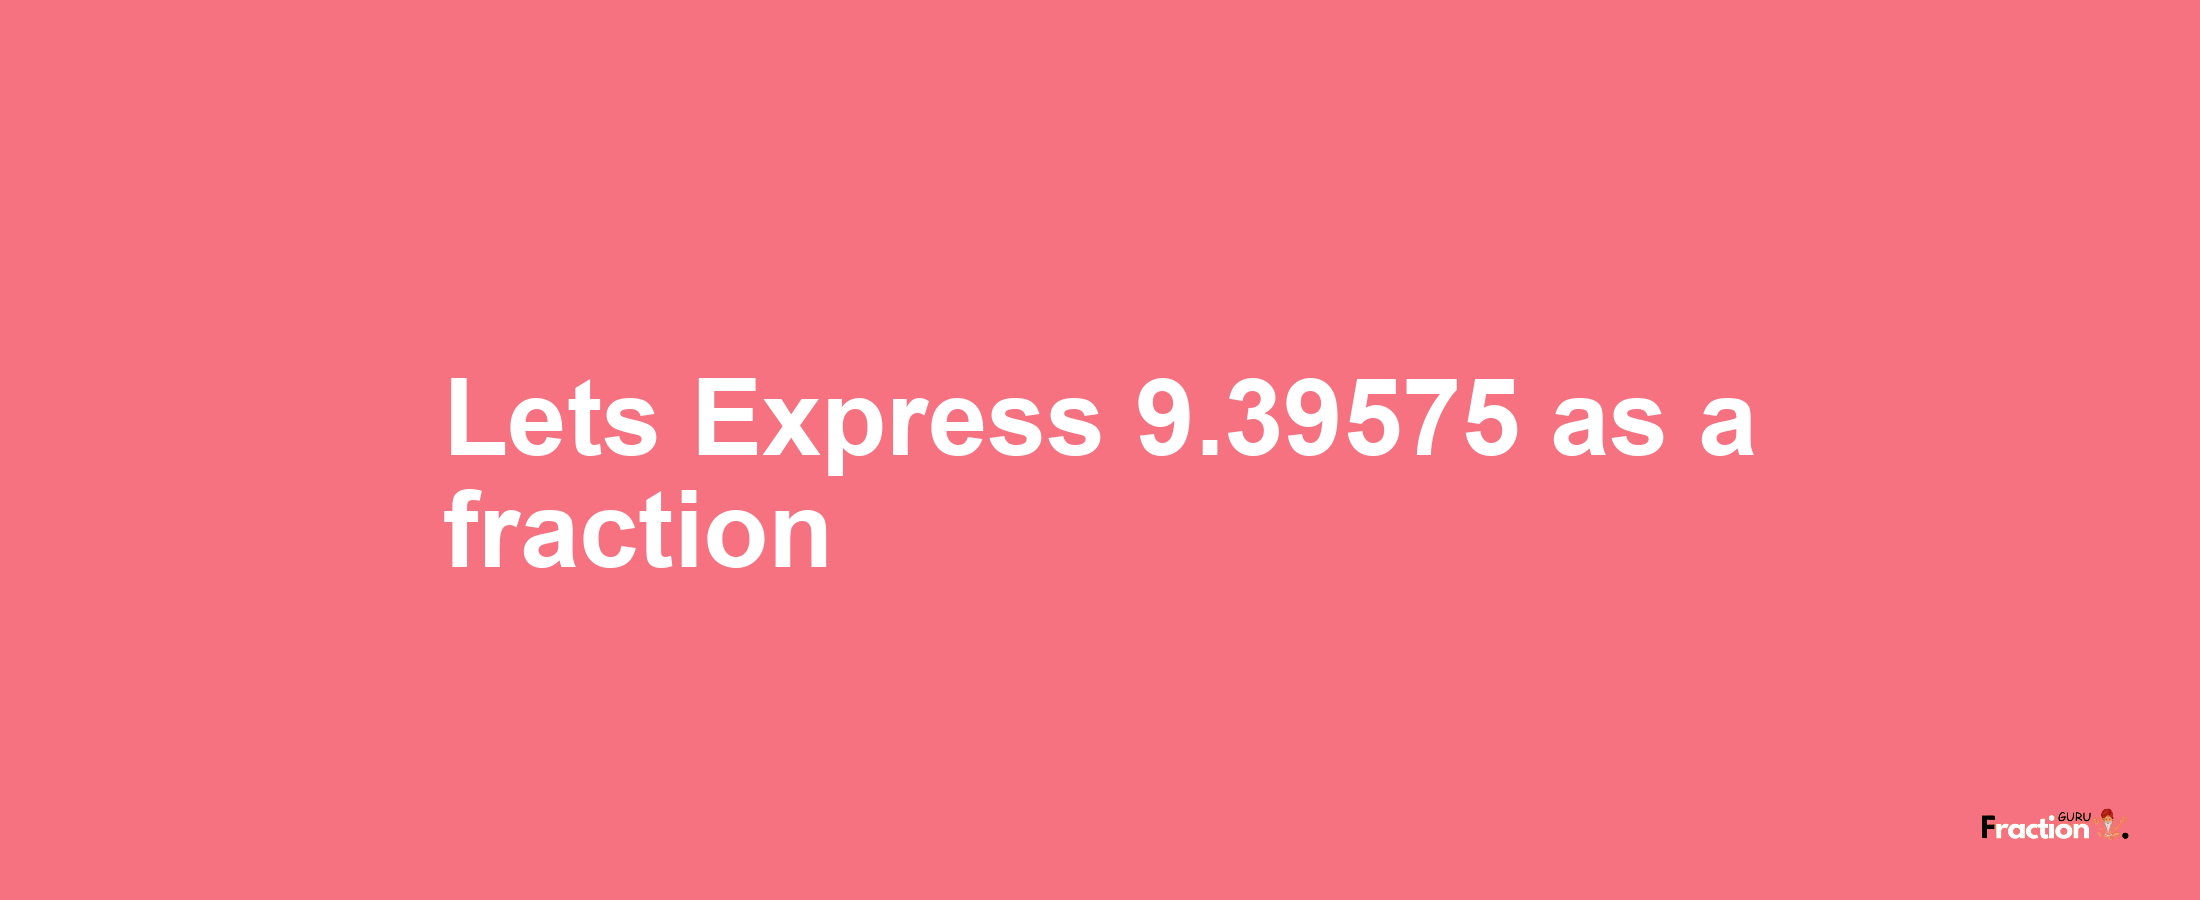 Lets Express 9.39575 as afraction